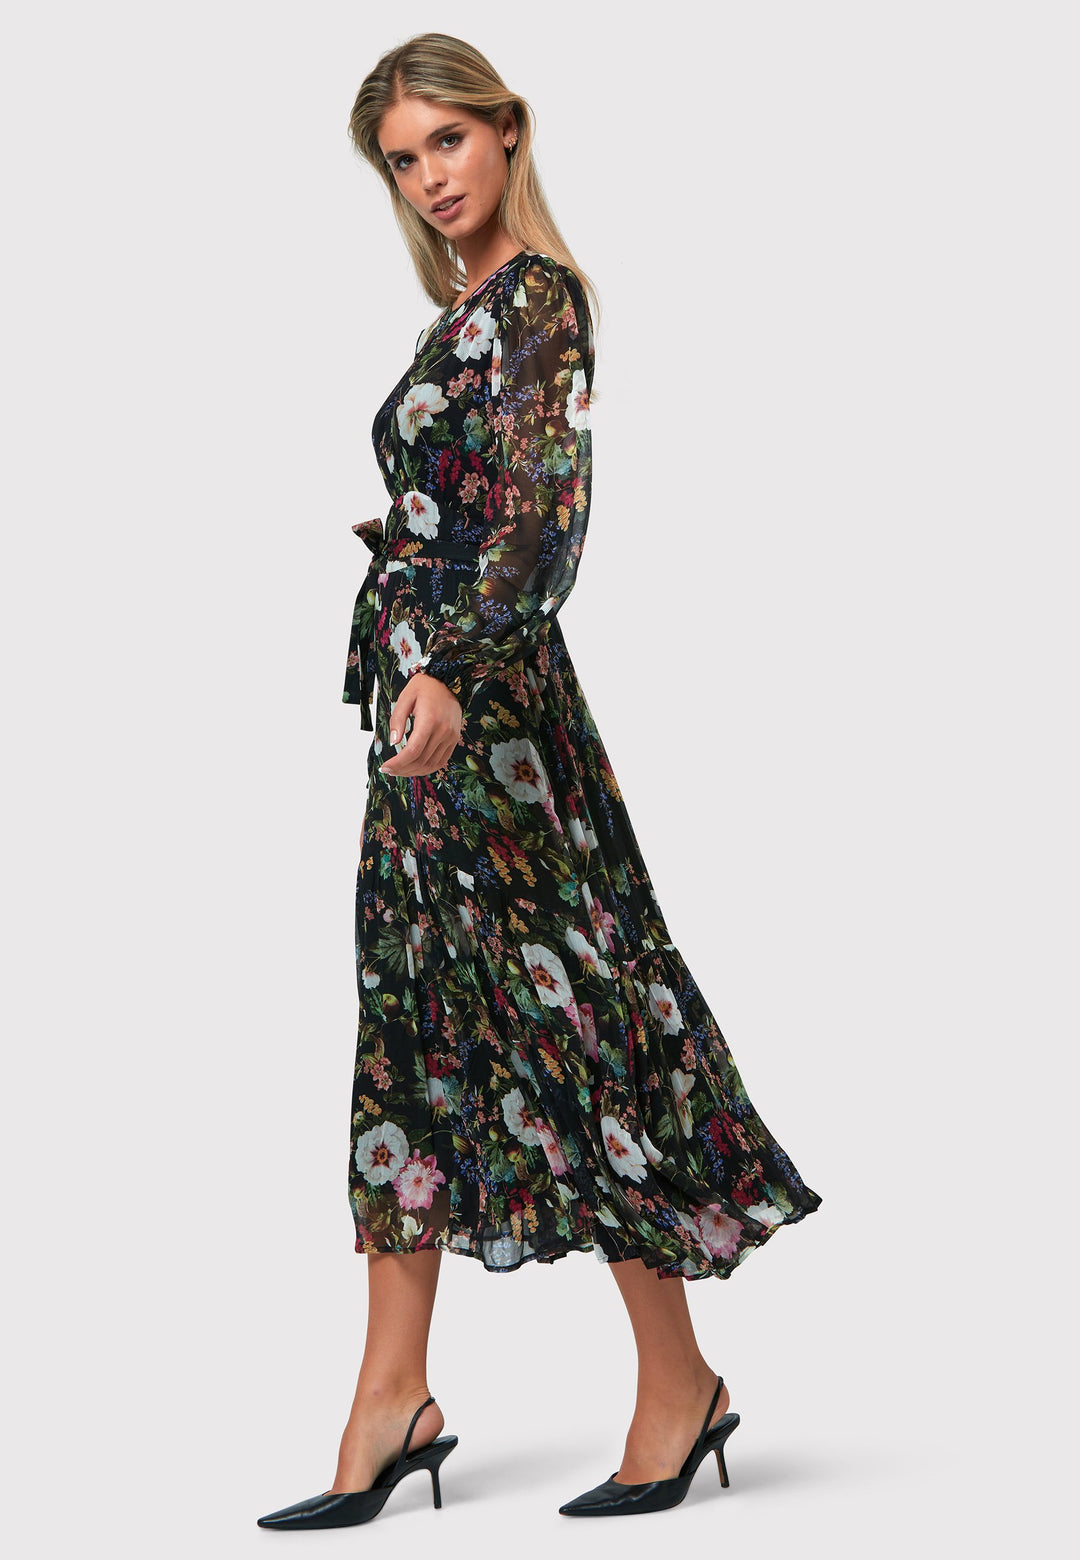 Bev Floral Noir Print Dress, a sophisticated choice that adds an elegant touch to your everyday wardrobe, now and in the future. This exquisite dress features a sweeping midi-length silhouette, designed with a blend of simplicity and feminine flair. The Jewel neckline is delicately enhanced with gentle gathers, while the softly flared skirt offers a flattering fit. 